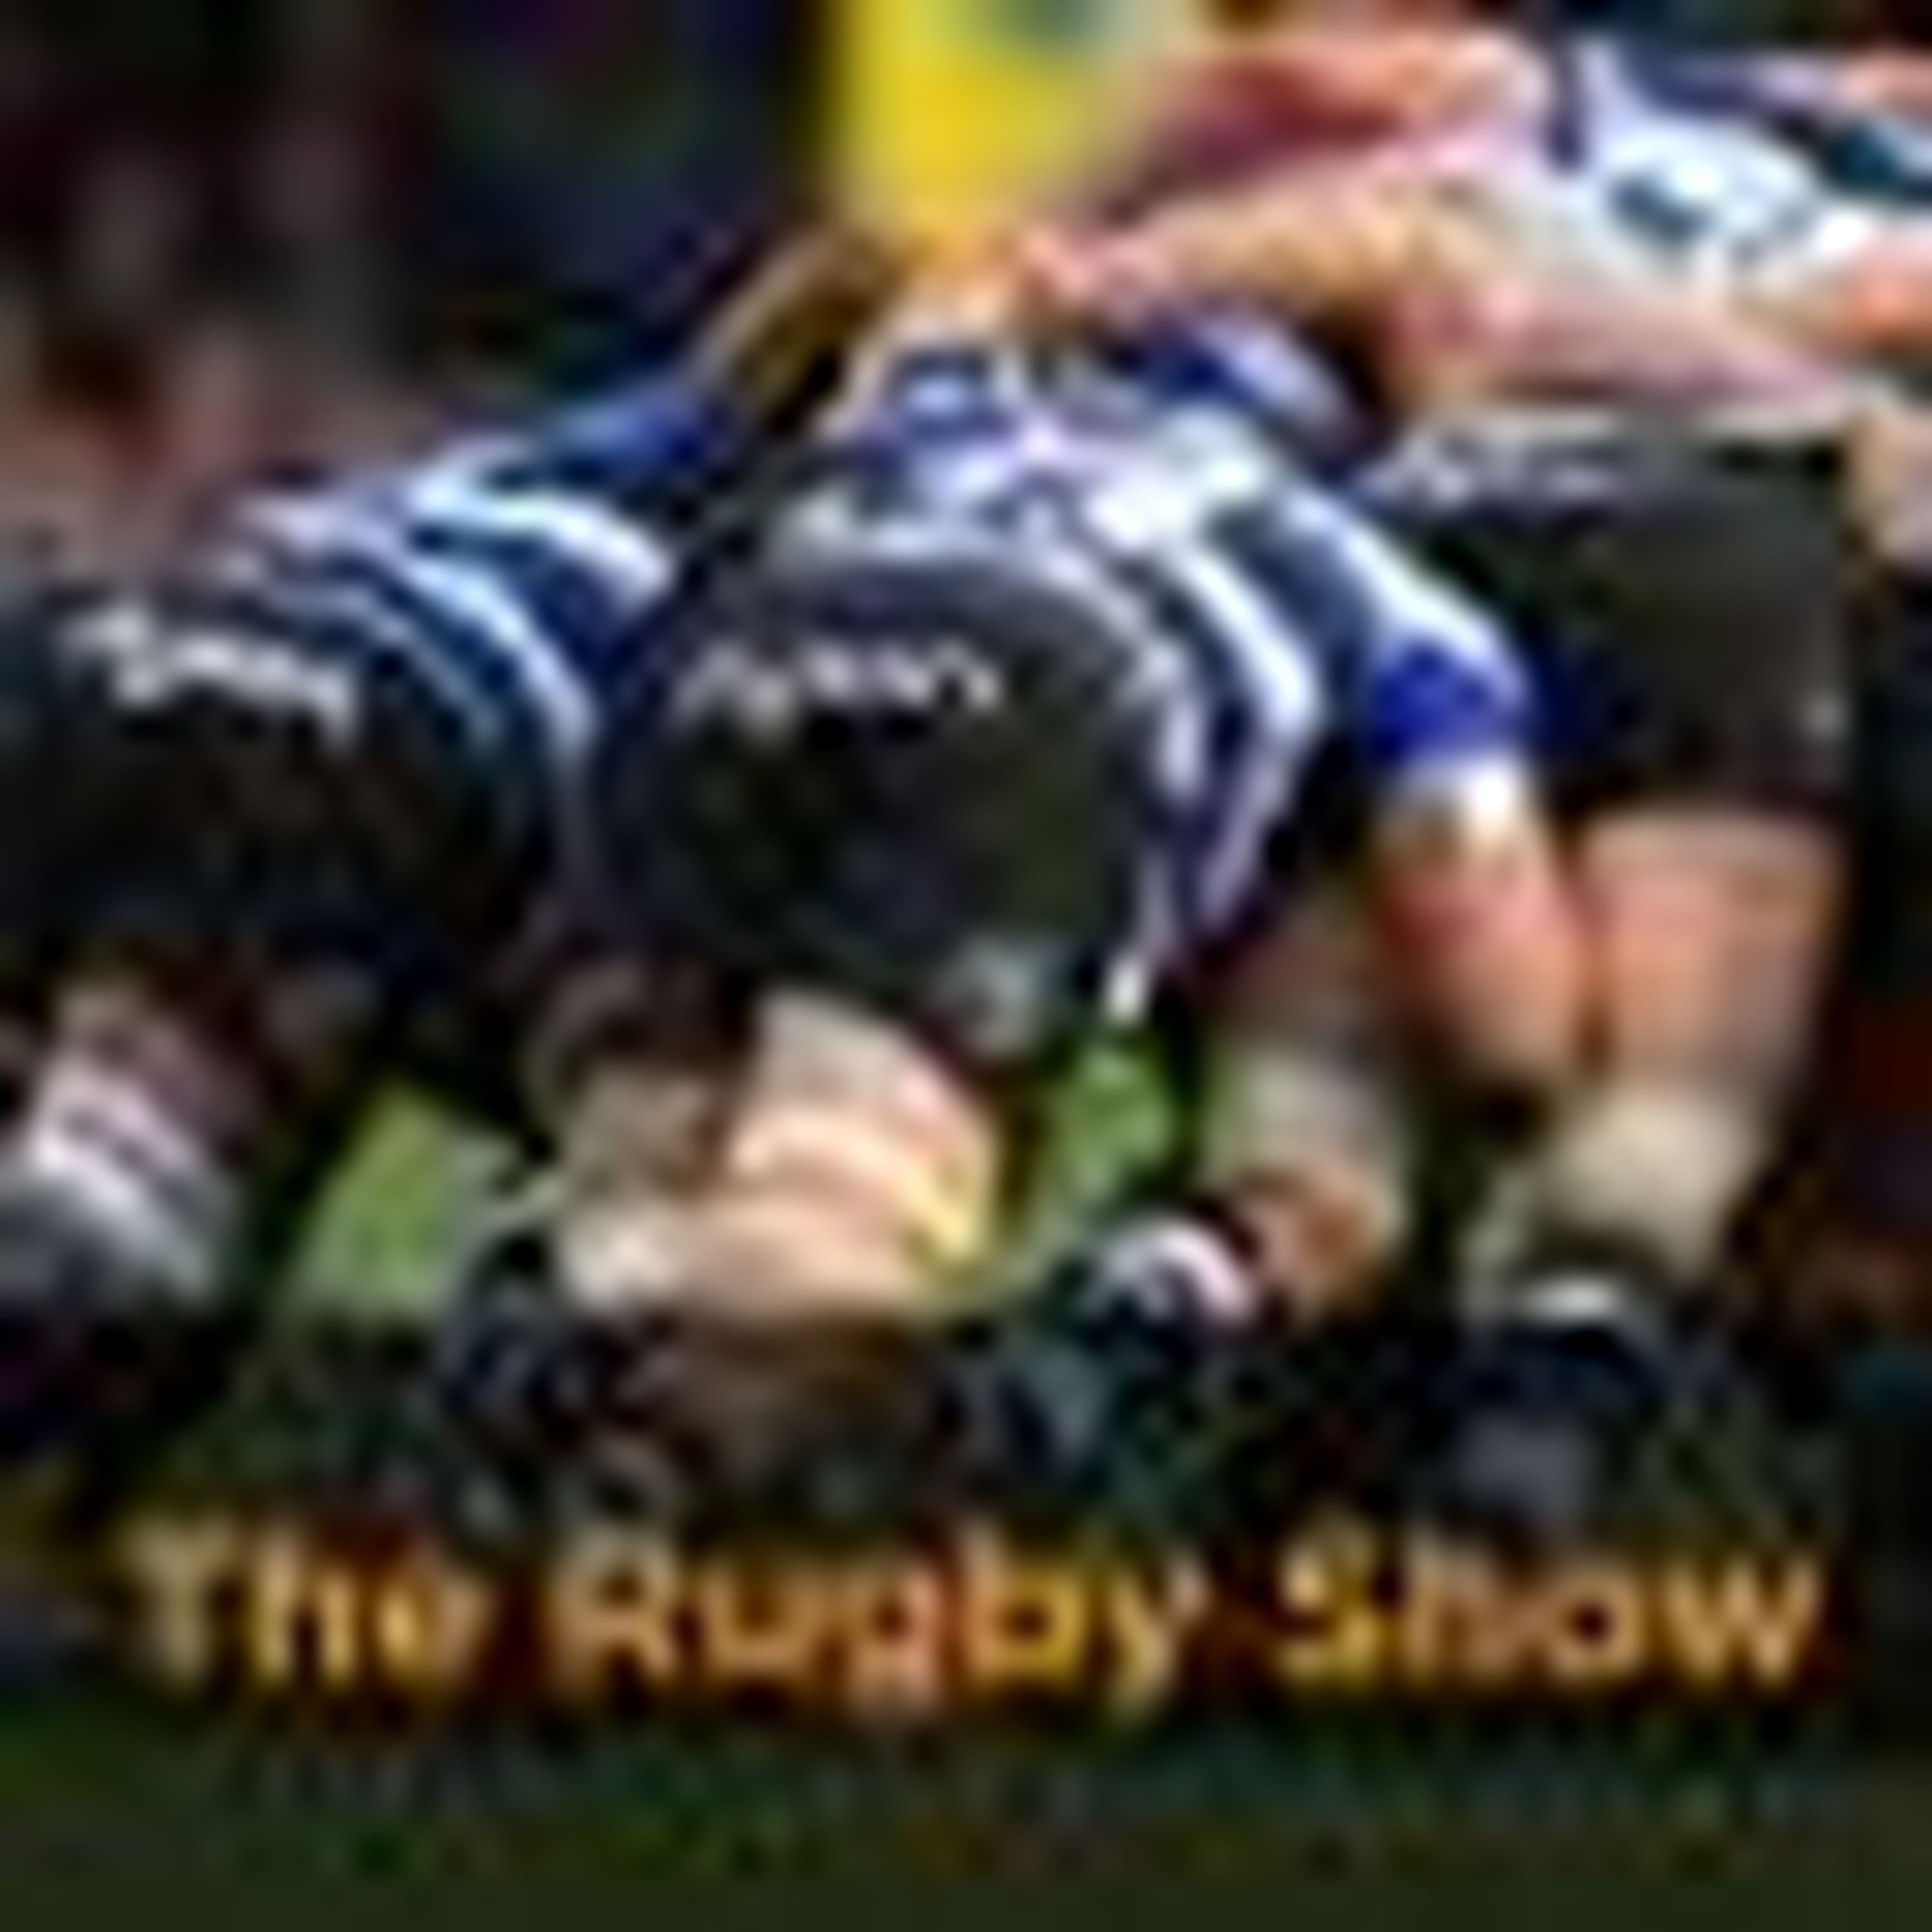 The Rugby Show podcast on talkSPORT 2 - April 9, 2018